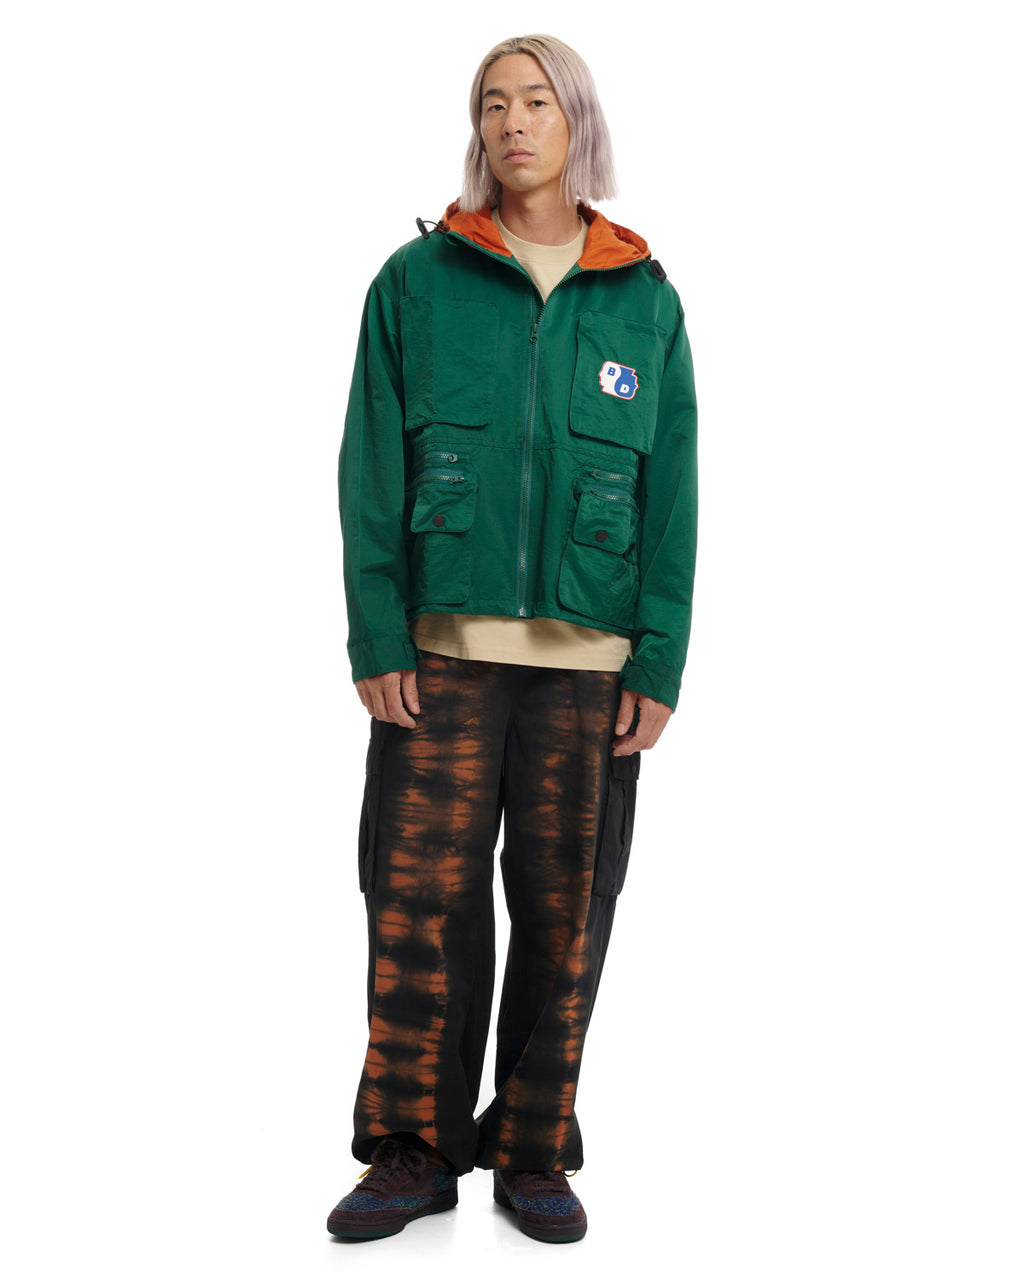 Cropped Hunting Jacket - Green/Terracotta 4